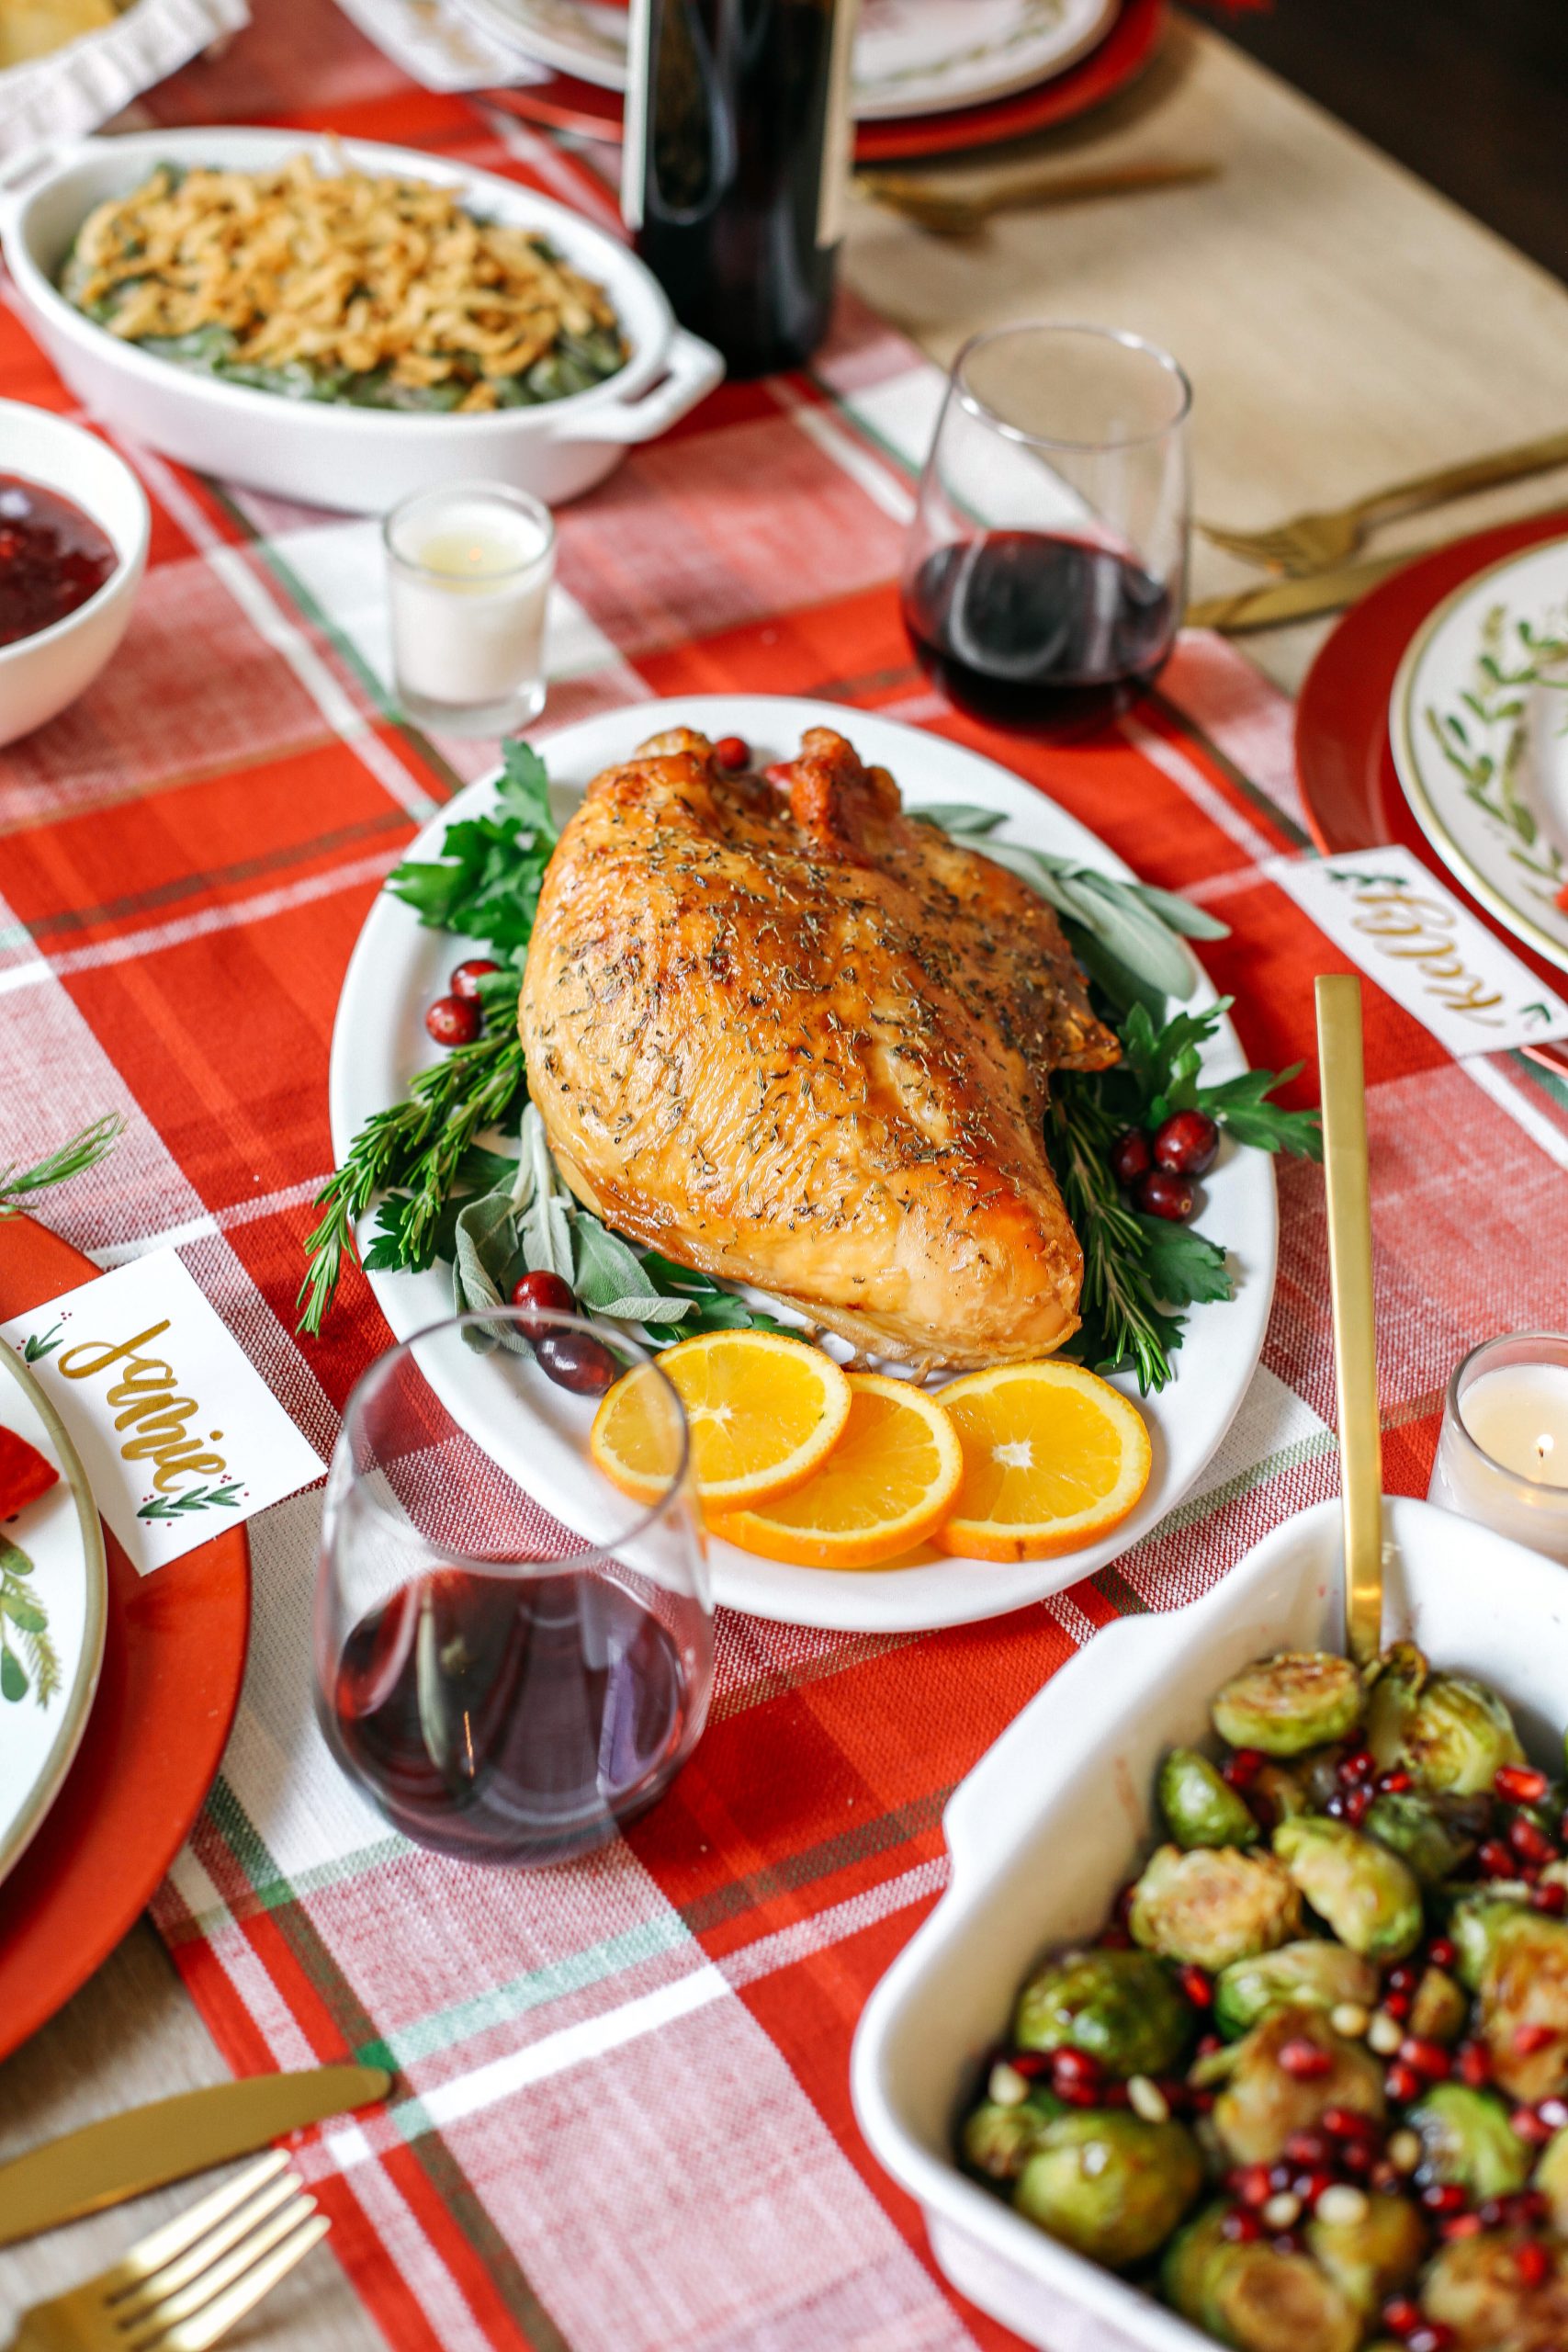 Celebrate the season and create lasting memories by a hosting a small holiday gathering this Christmas with classic dishes your family is sure to enjoy! 